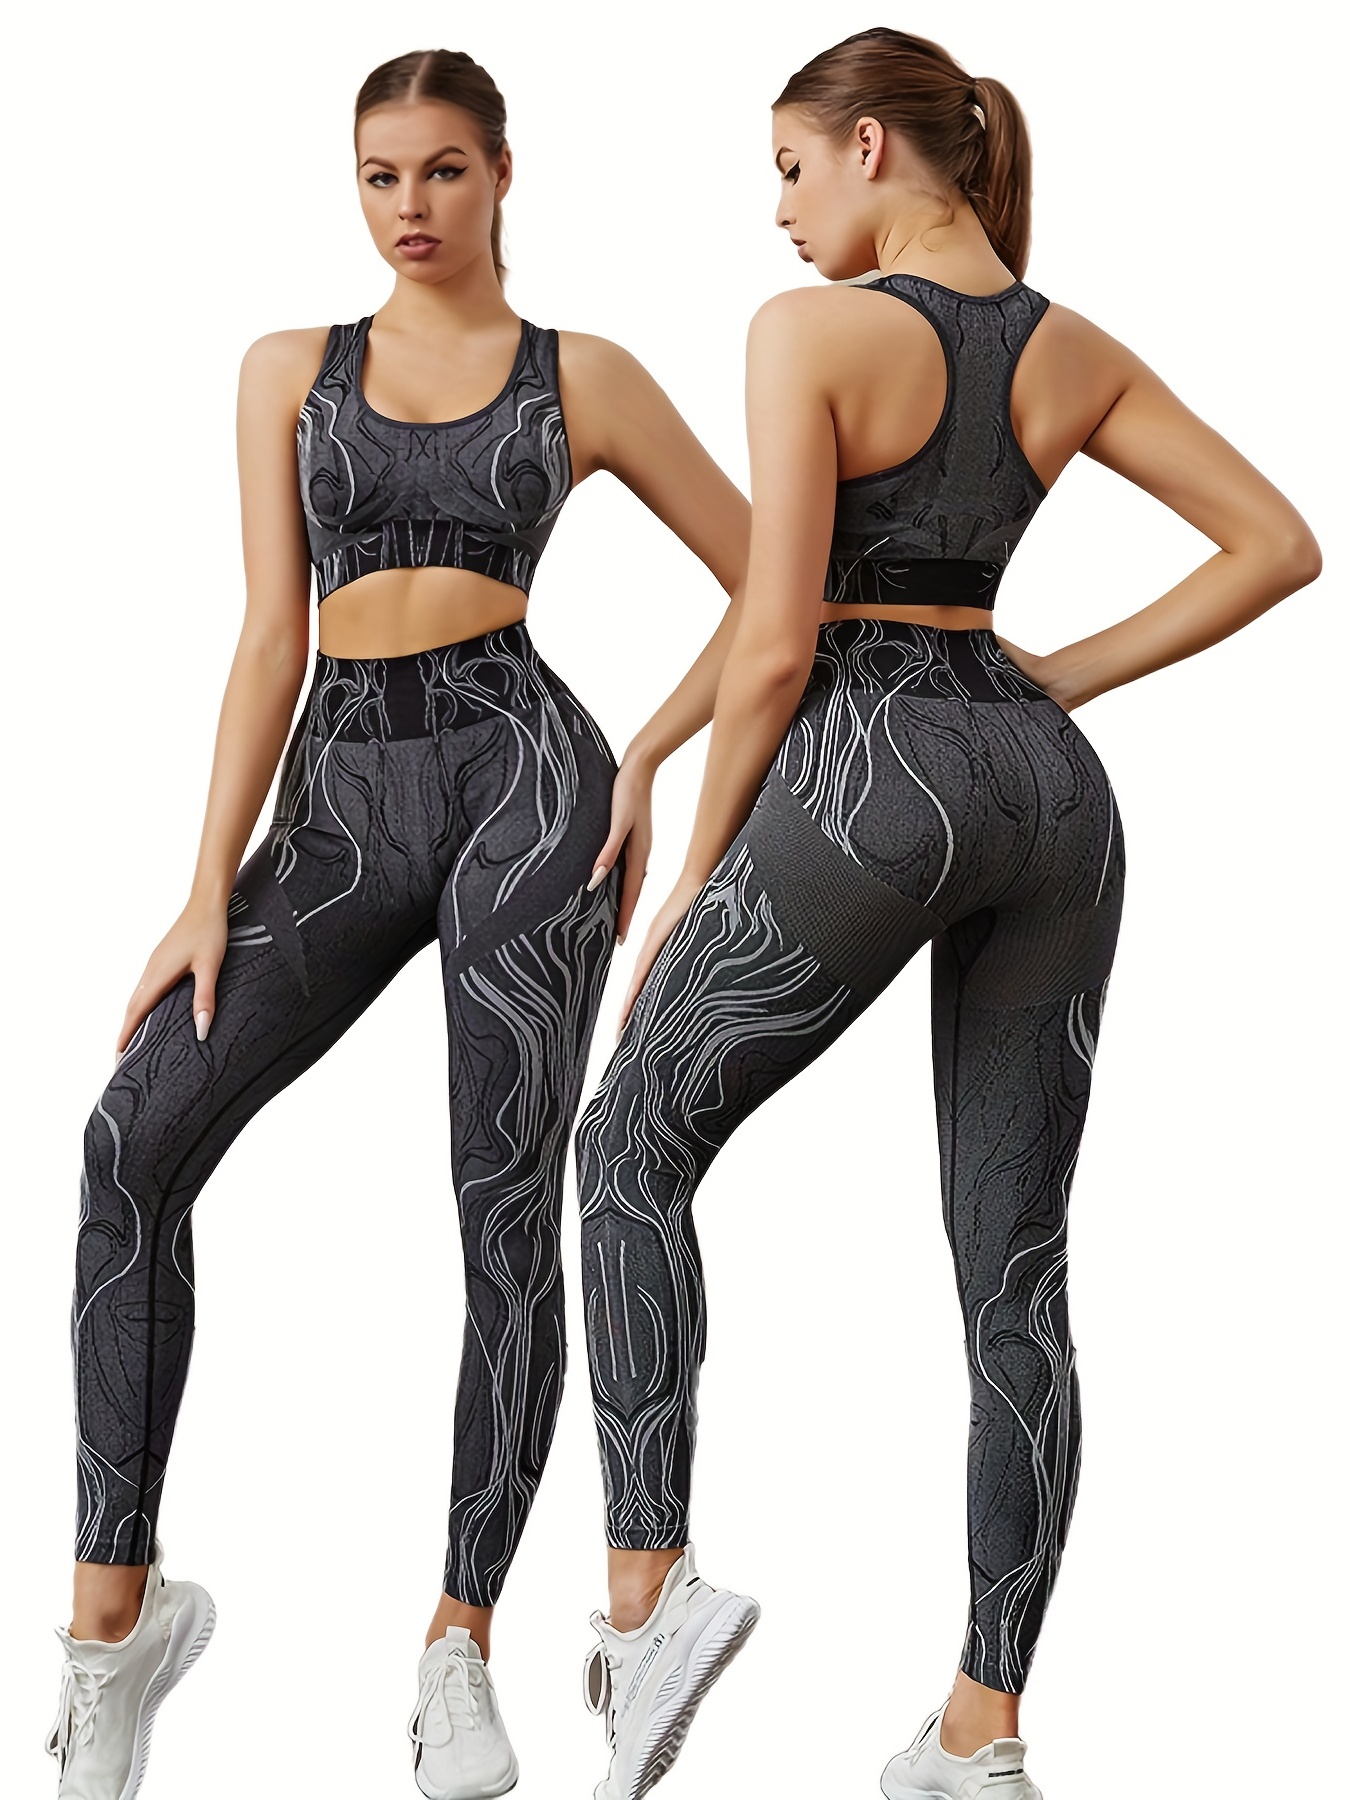 Trendy Stripe Pattern High Waisted Leggings Printed Workout Pants Spandex  Yoga Fitness Leggings Gym Clothing Sport Tights Bottoms 